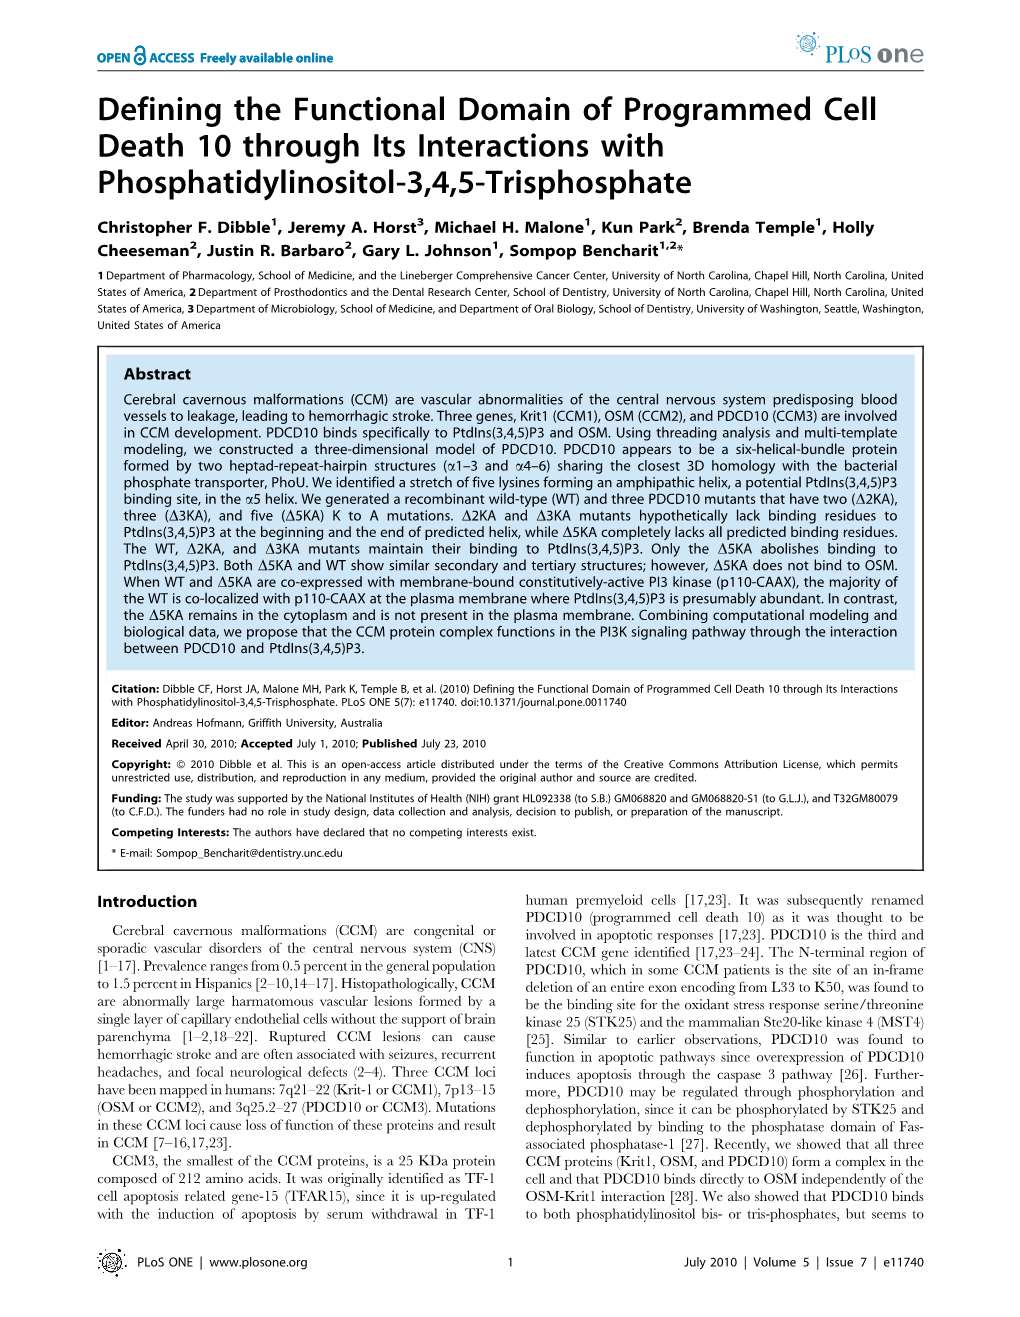 Defining the Functional Domain of Programmed Cell Death 10 Through Its Interactions with Phosphatidylinositol-3,4,5-Trisphosphate